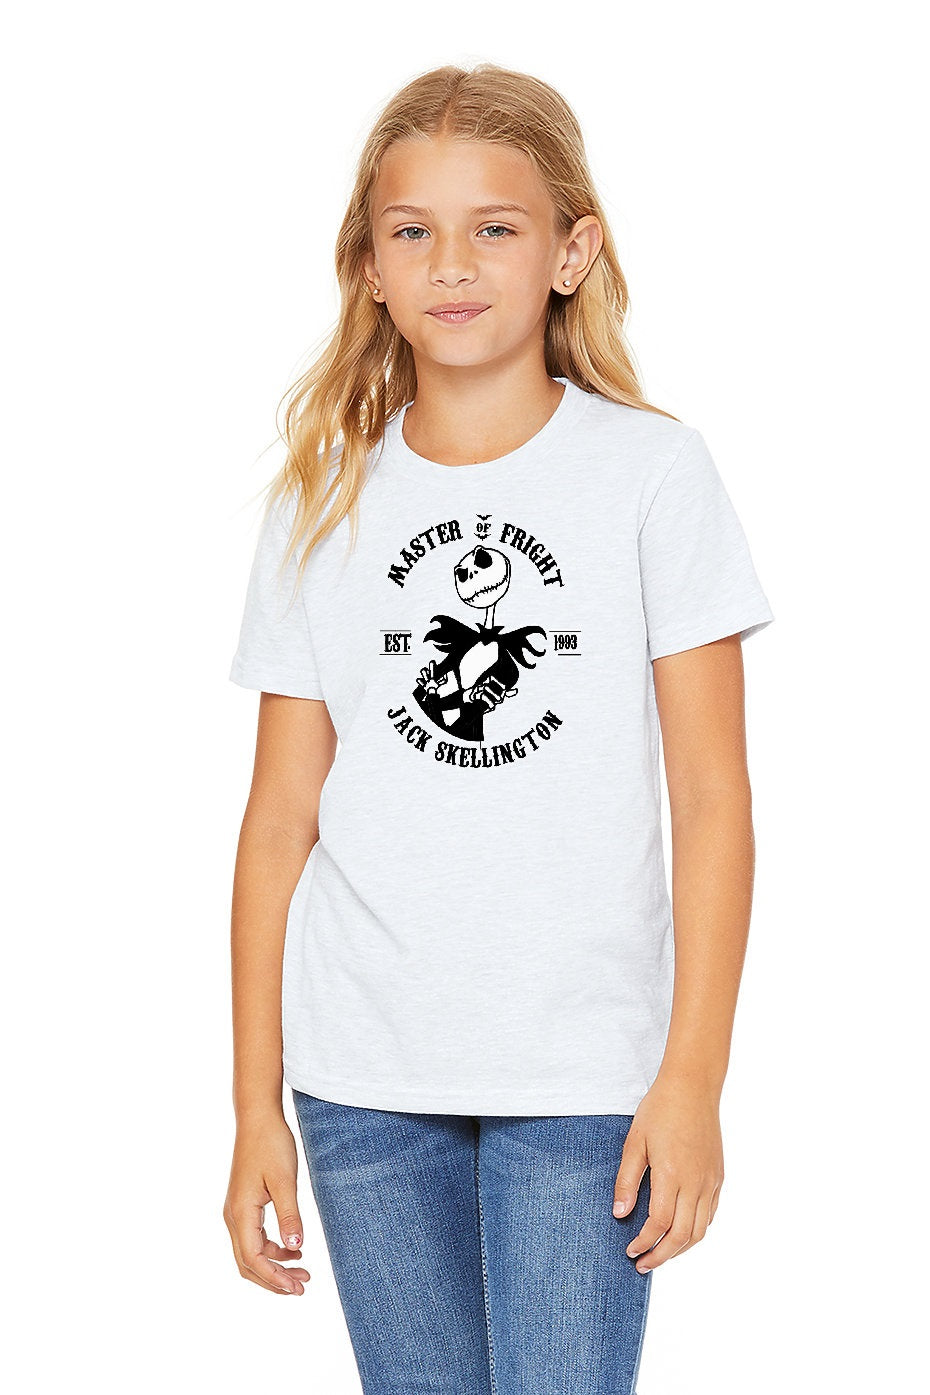 Master of Fright Jack Skellington Nightmare before Christmas  Youth and Toddler Unisex T-Shirt